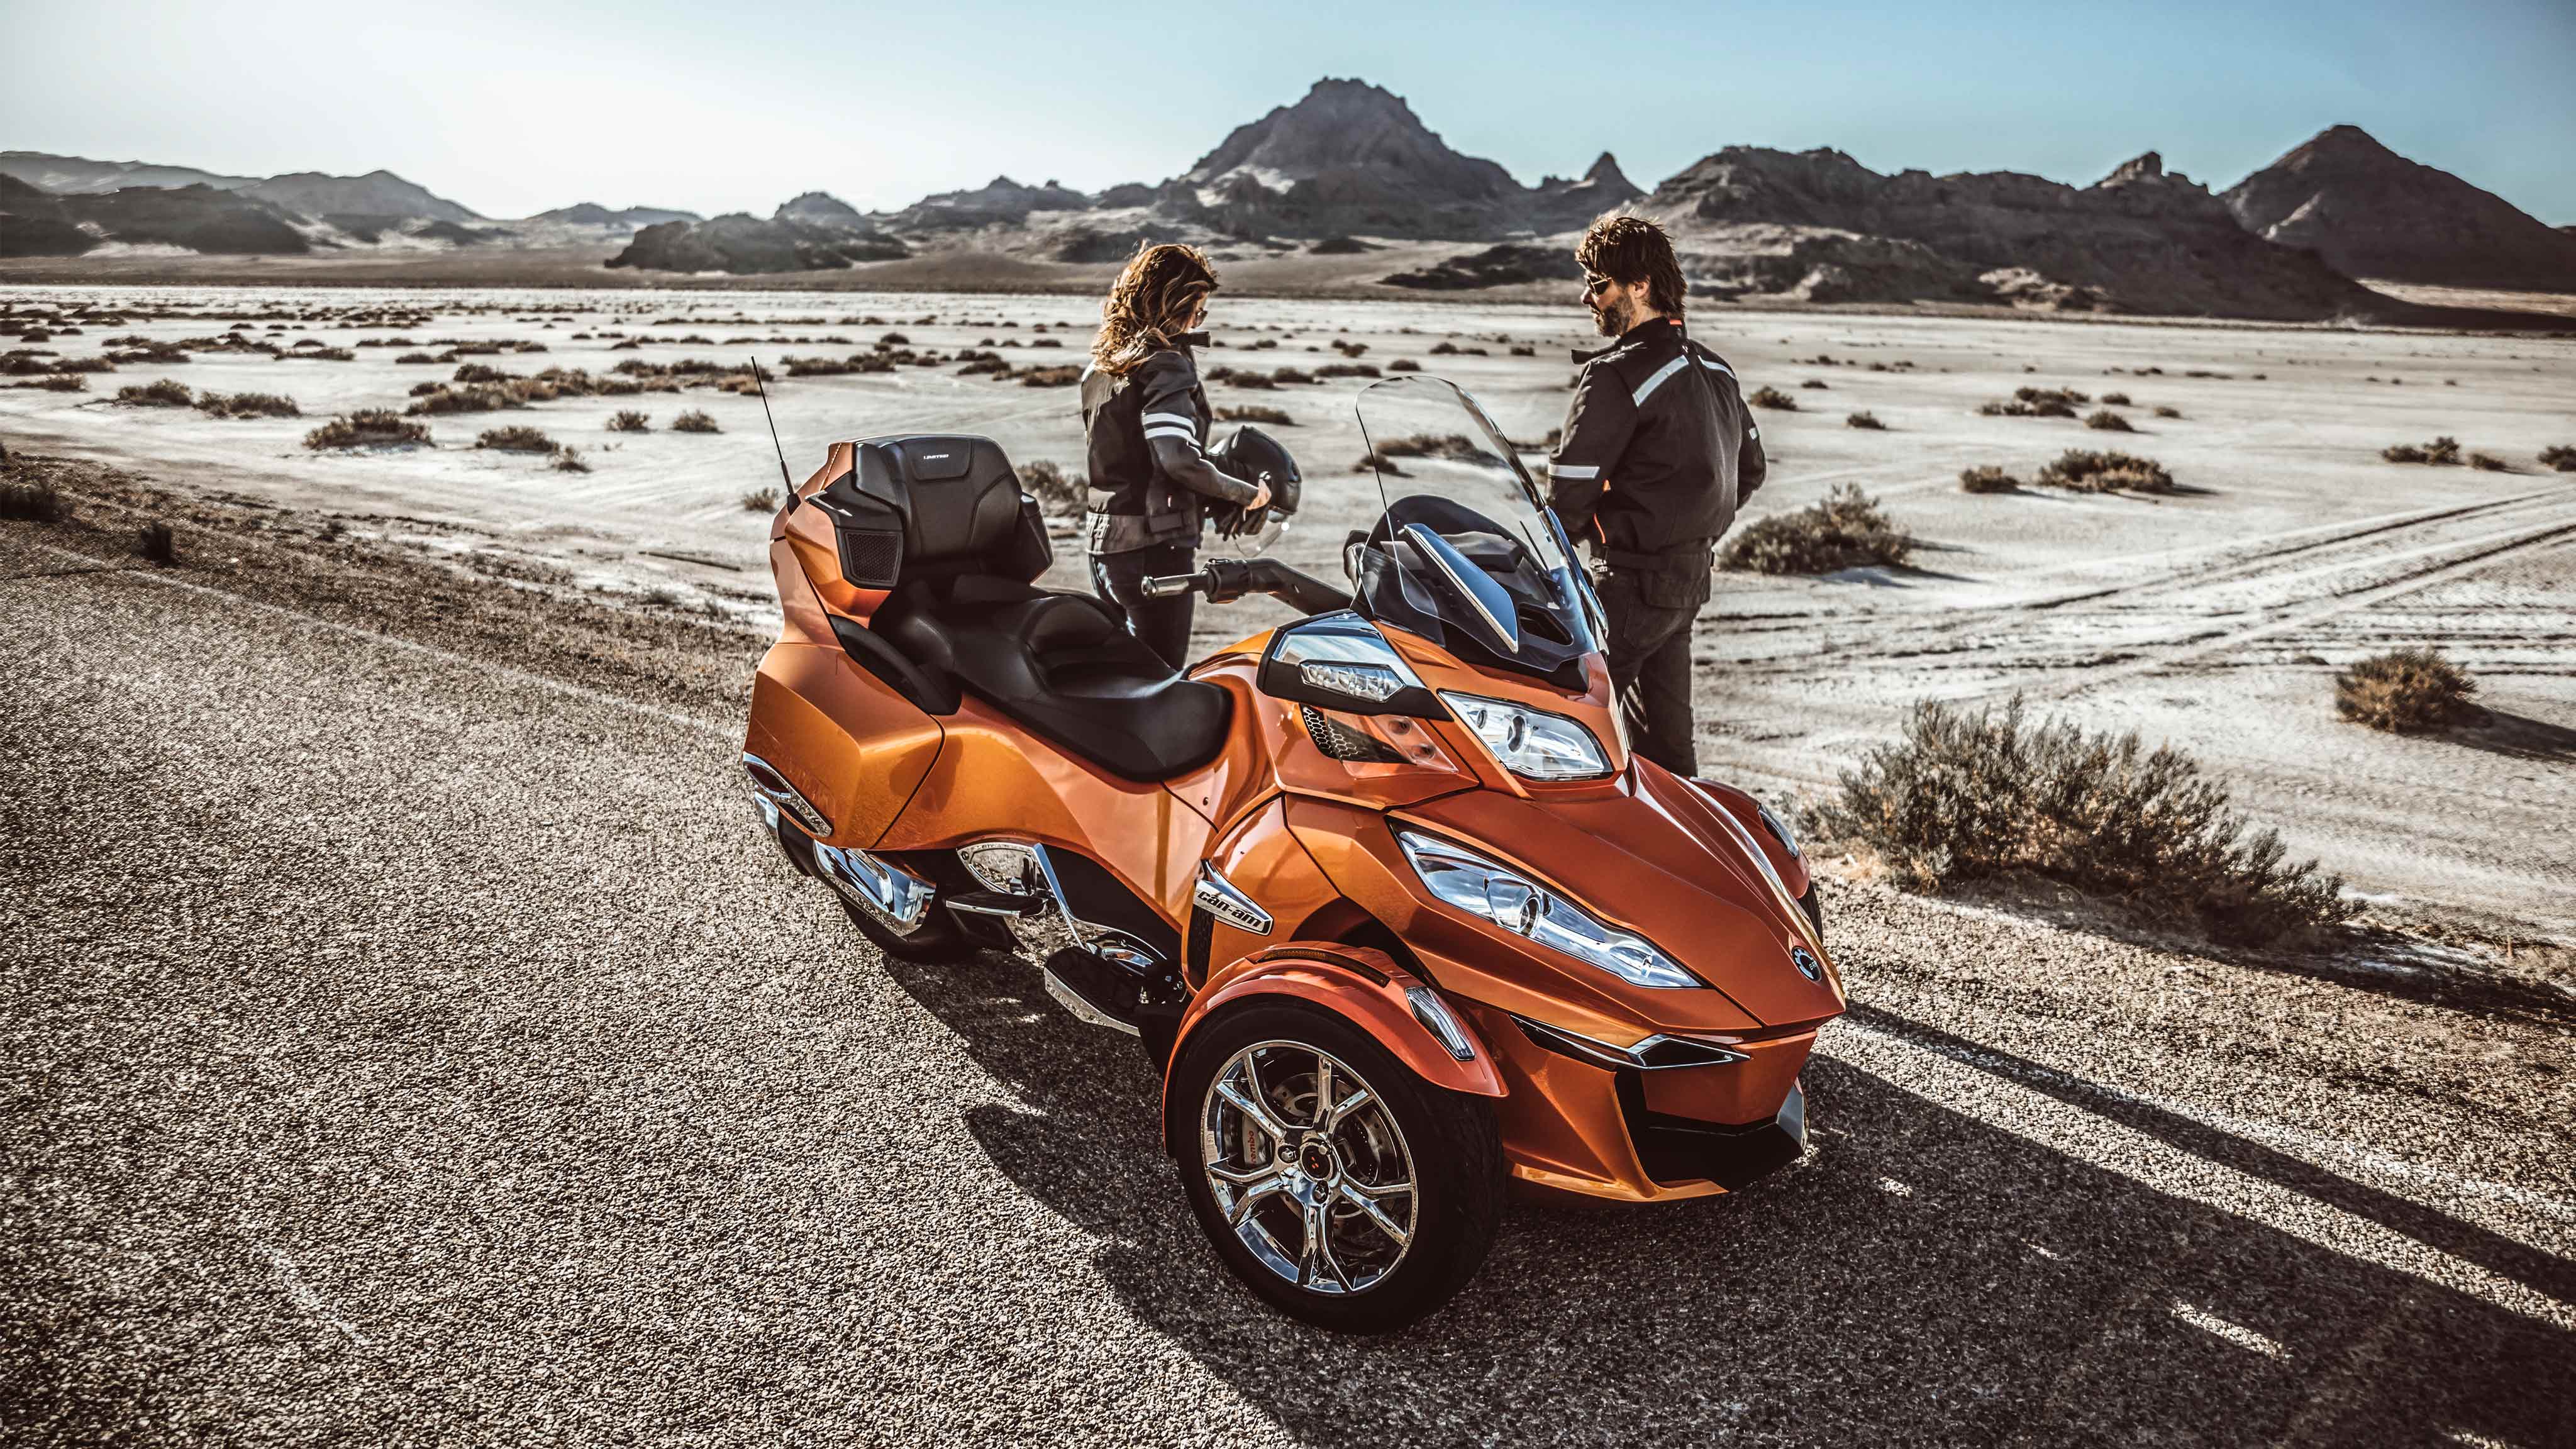 deals-rebates-on-can-am-spyder-and-can-am-ryker-models-can-am-on-road